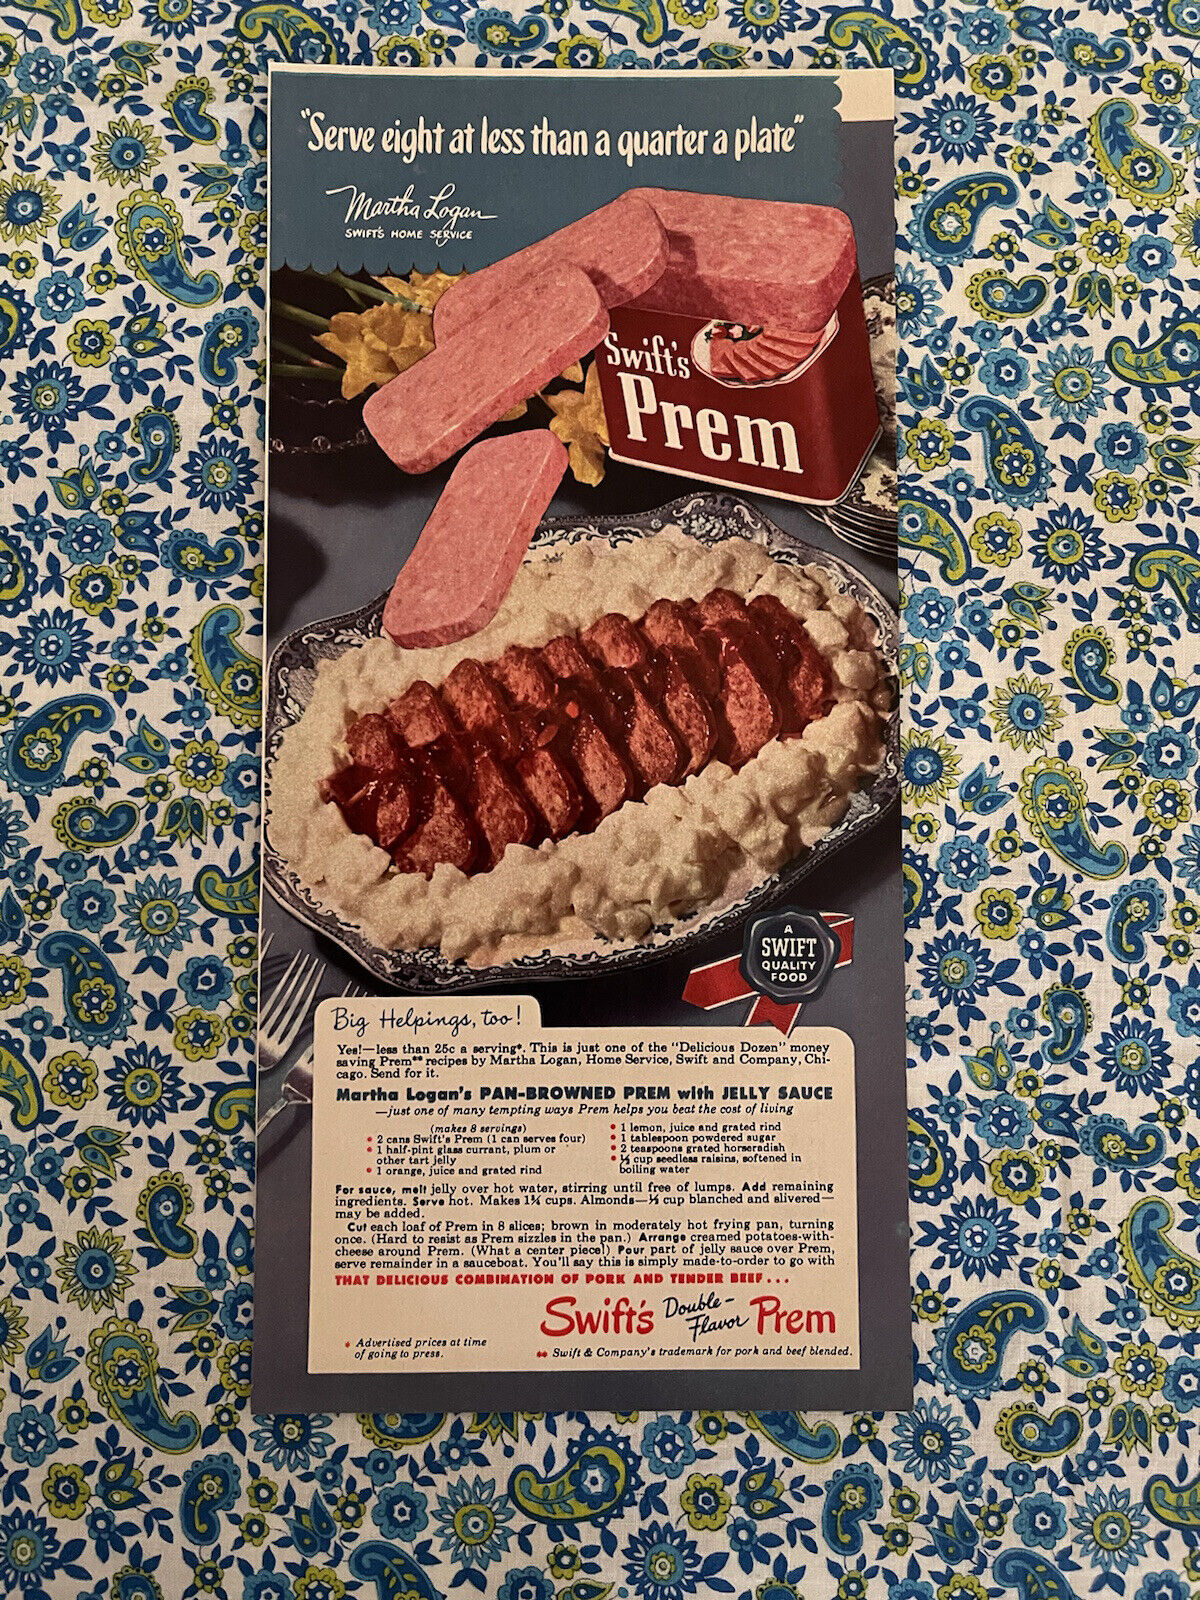 Vintage 1949 Swift’s Prem Canned Meat Print Ad Recipe Included On Ad